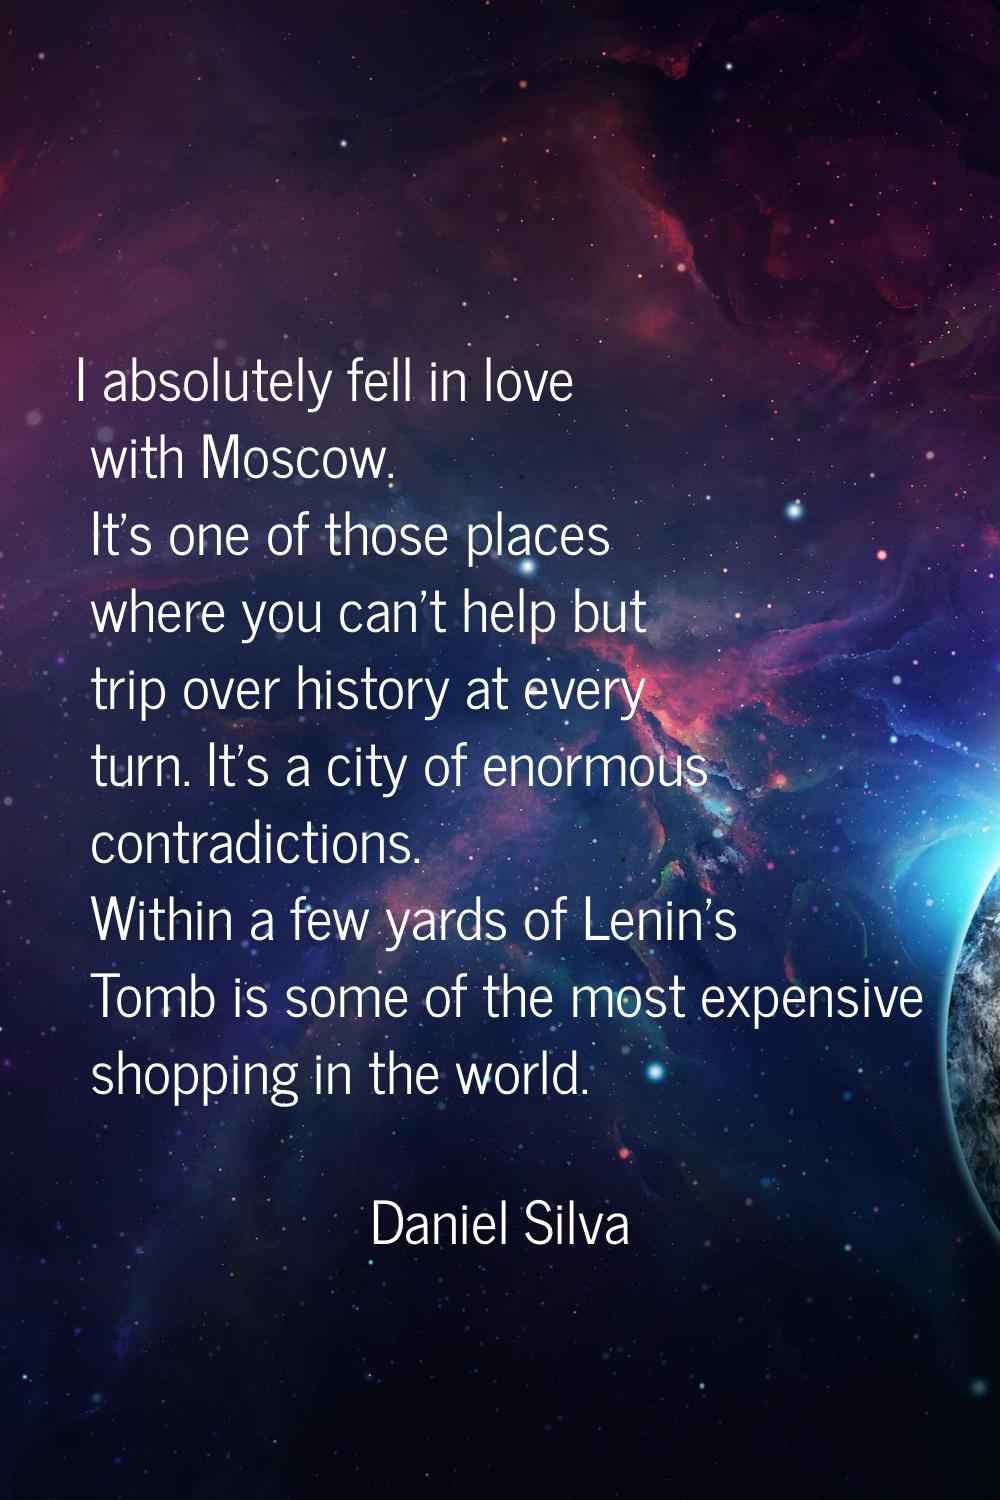 I absolutely fell in love with Moscow. It's one of those places where you can't help but trip over 